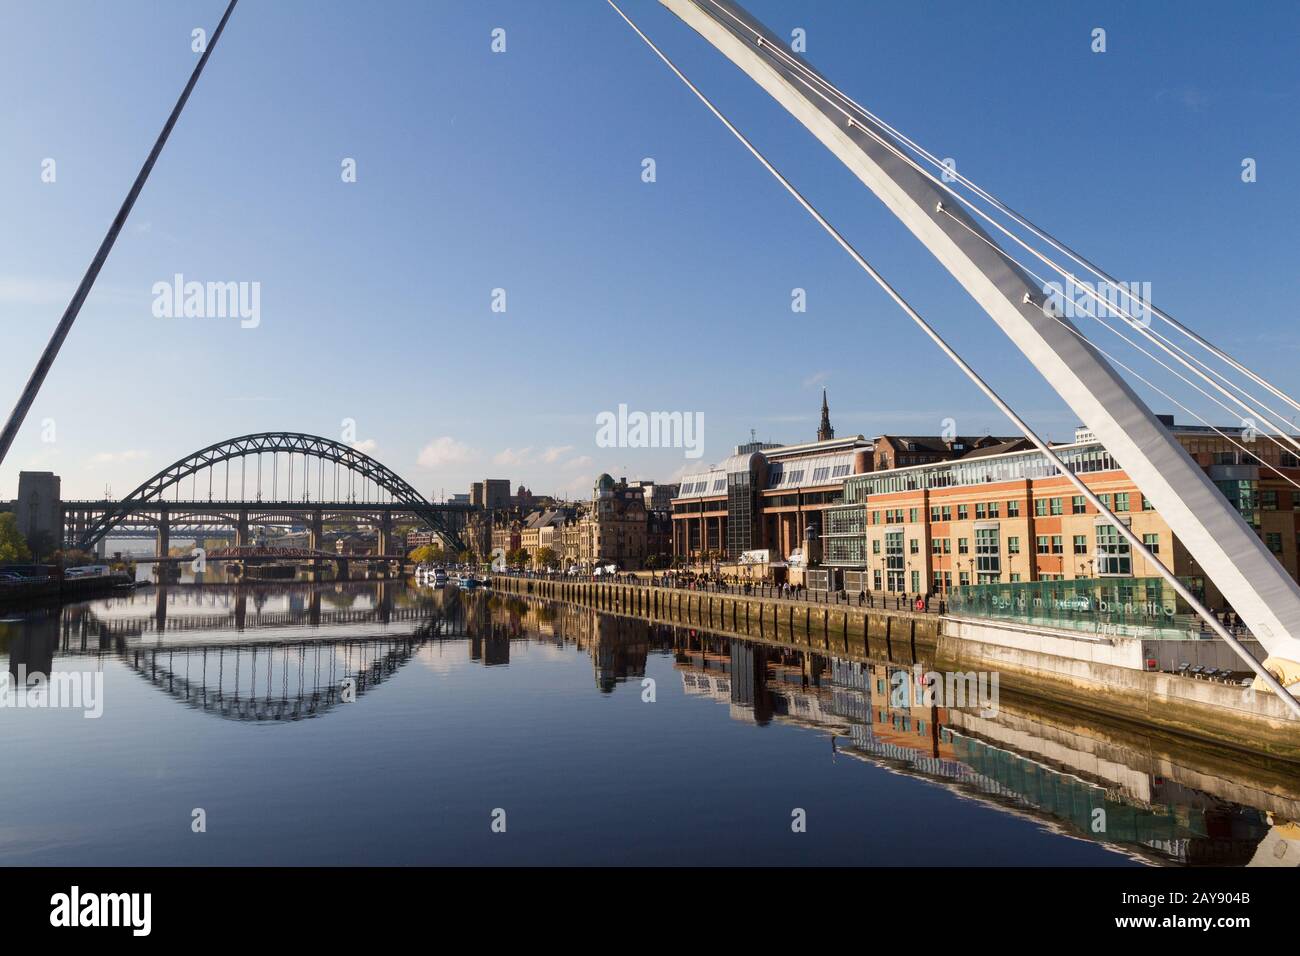 Newcastle Gateshead Quayside with Millenium and Tyne Bridges in view Stock Photo